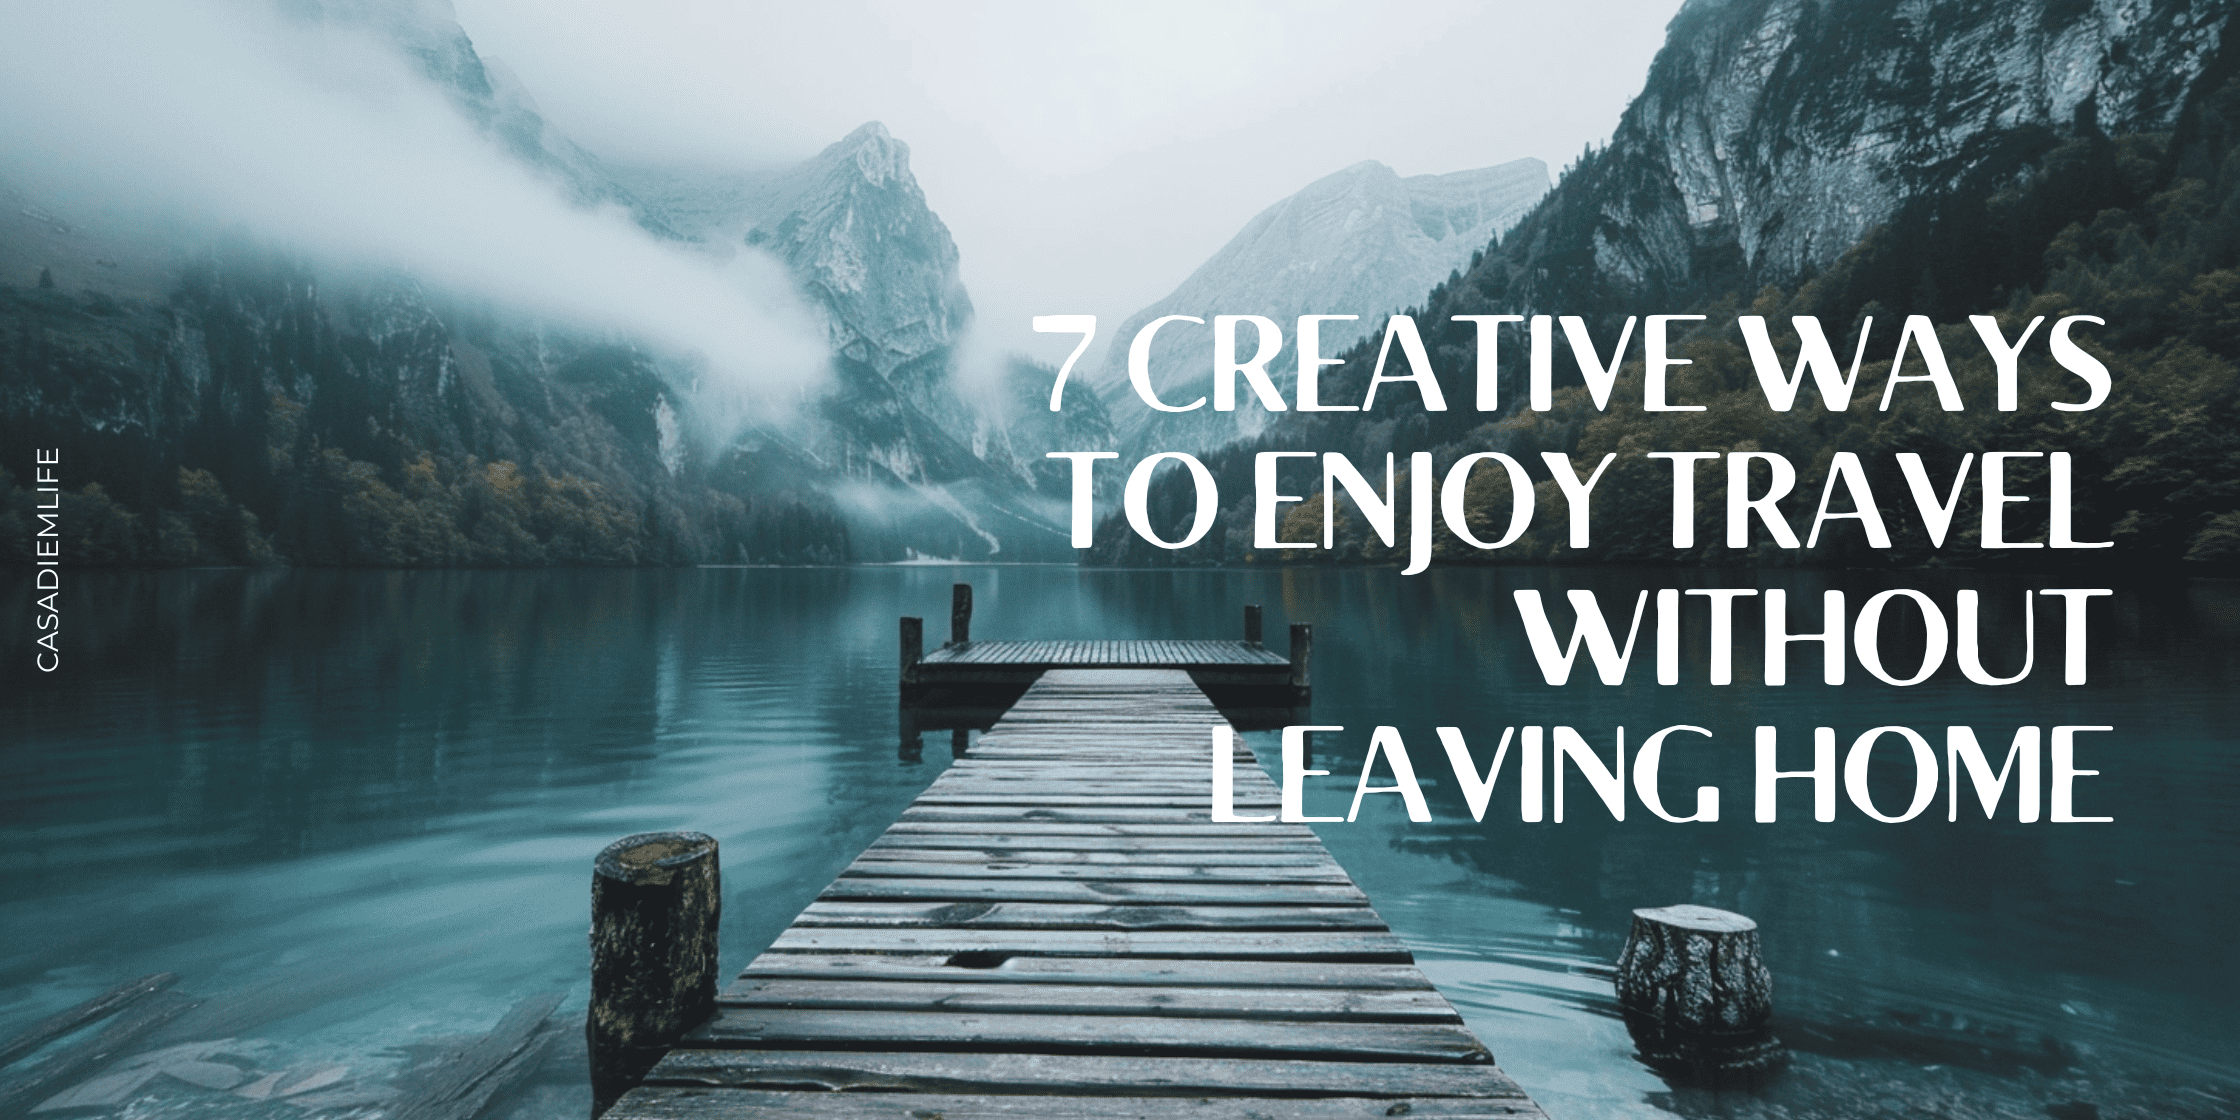 7 creative ways to travel without leaving home (1)